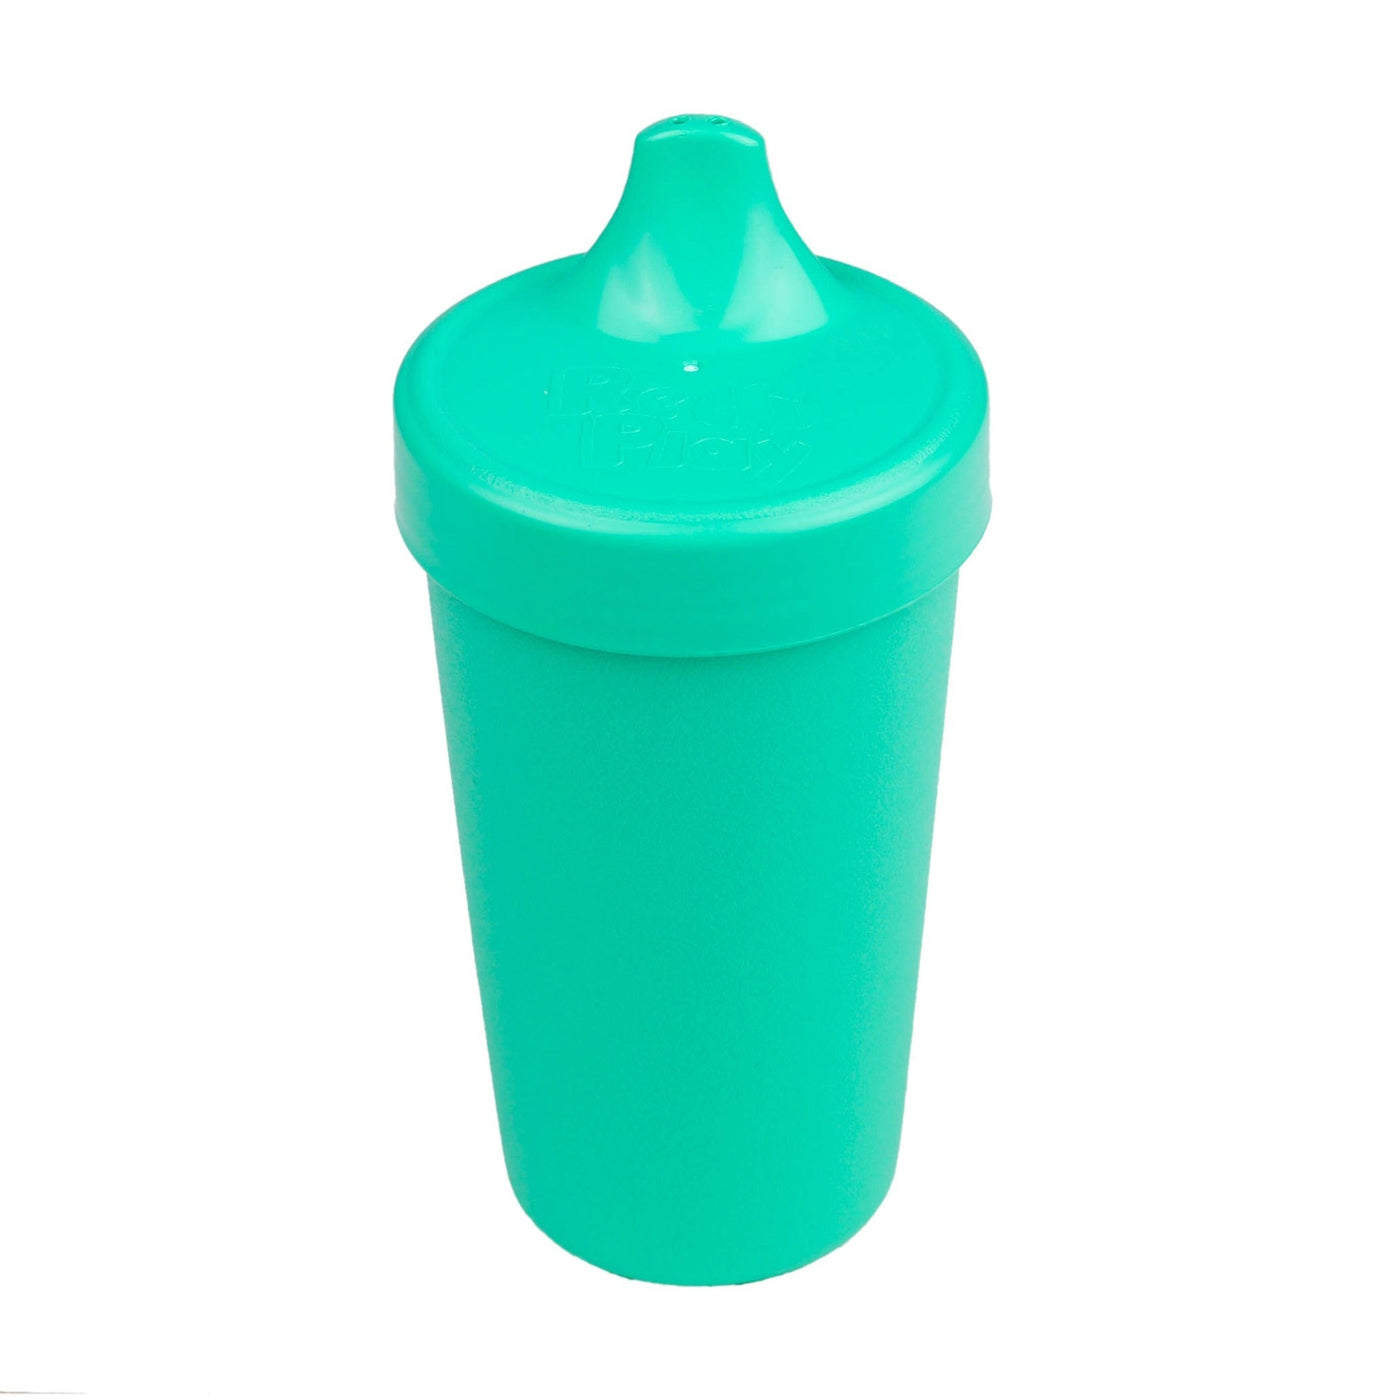 Re-Play Recycled Spill Proof Lid - Aqua